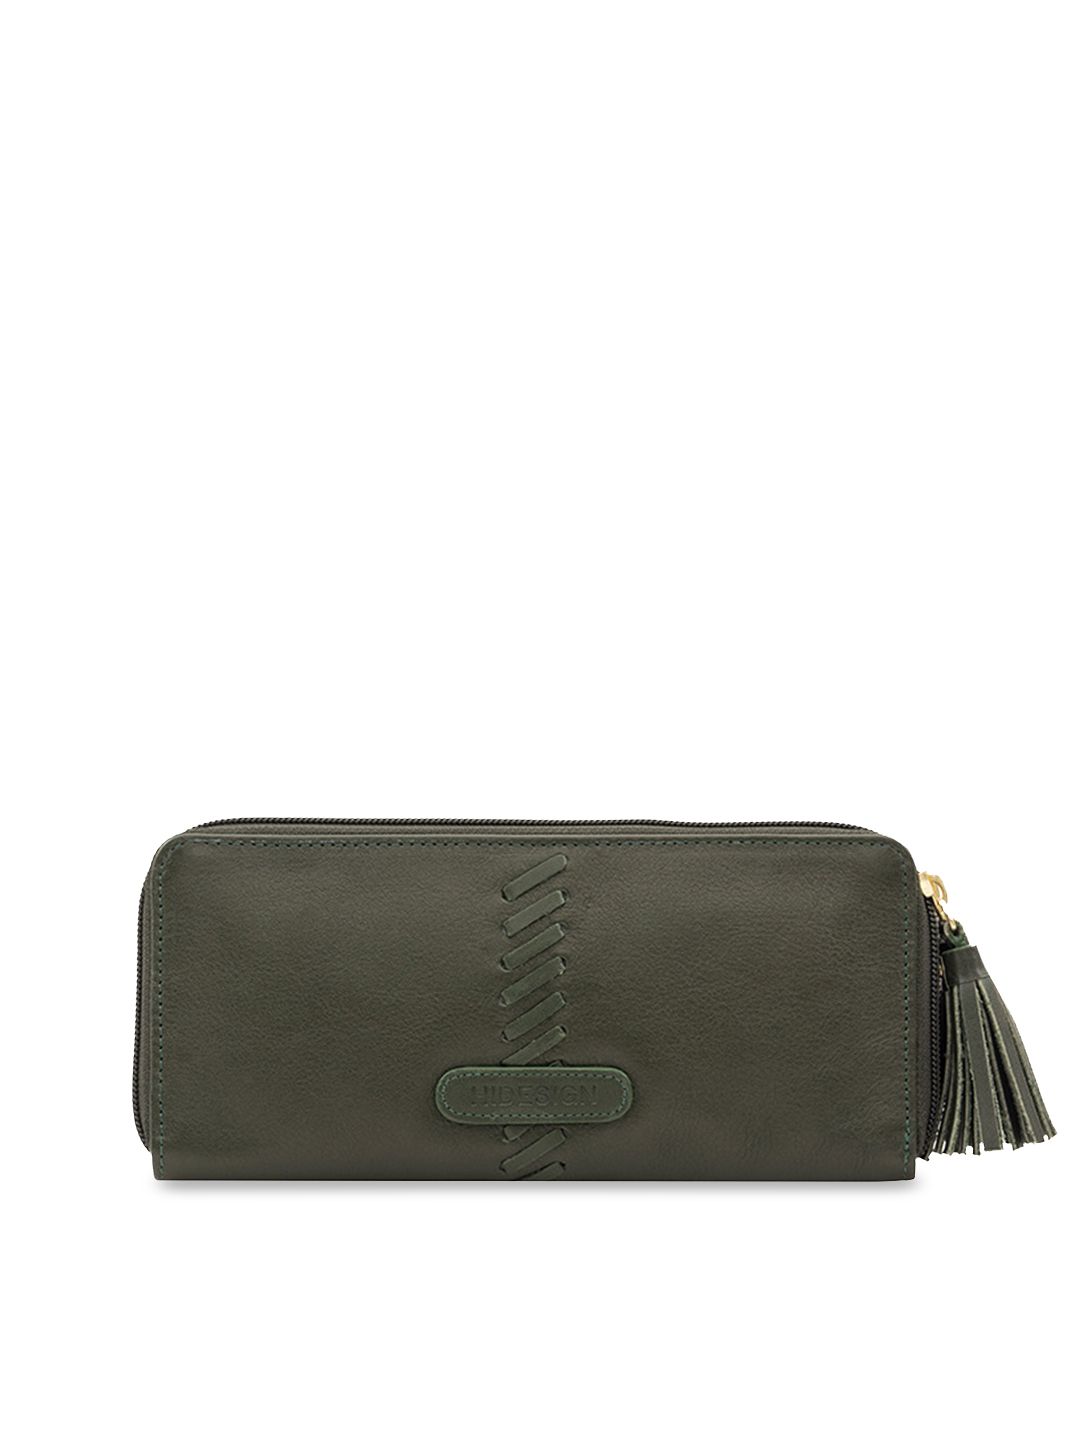 Hidesign Women Olive Green Solid Leather Zip Around Wallet Price in India